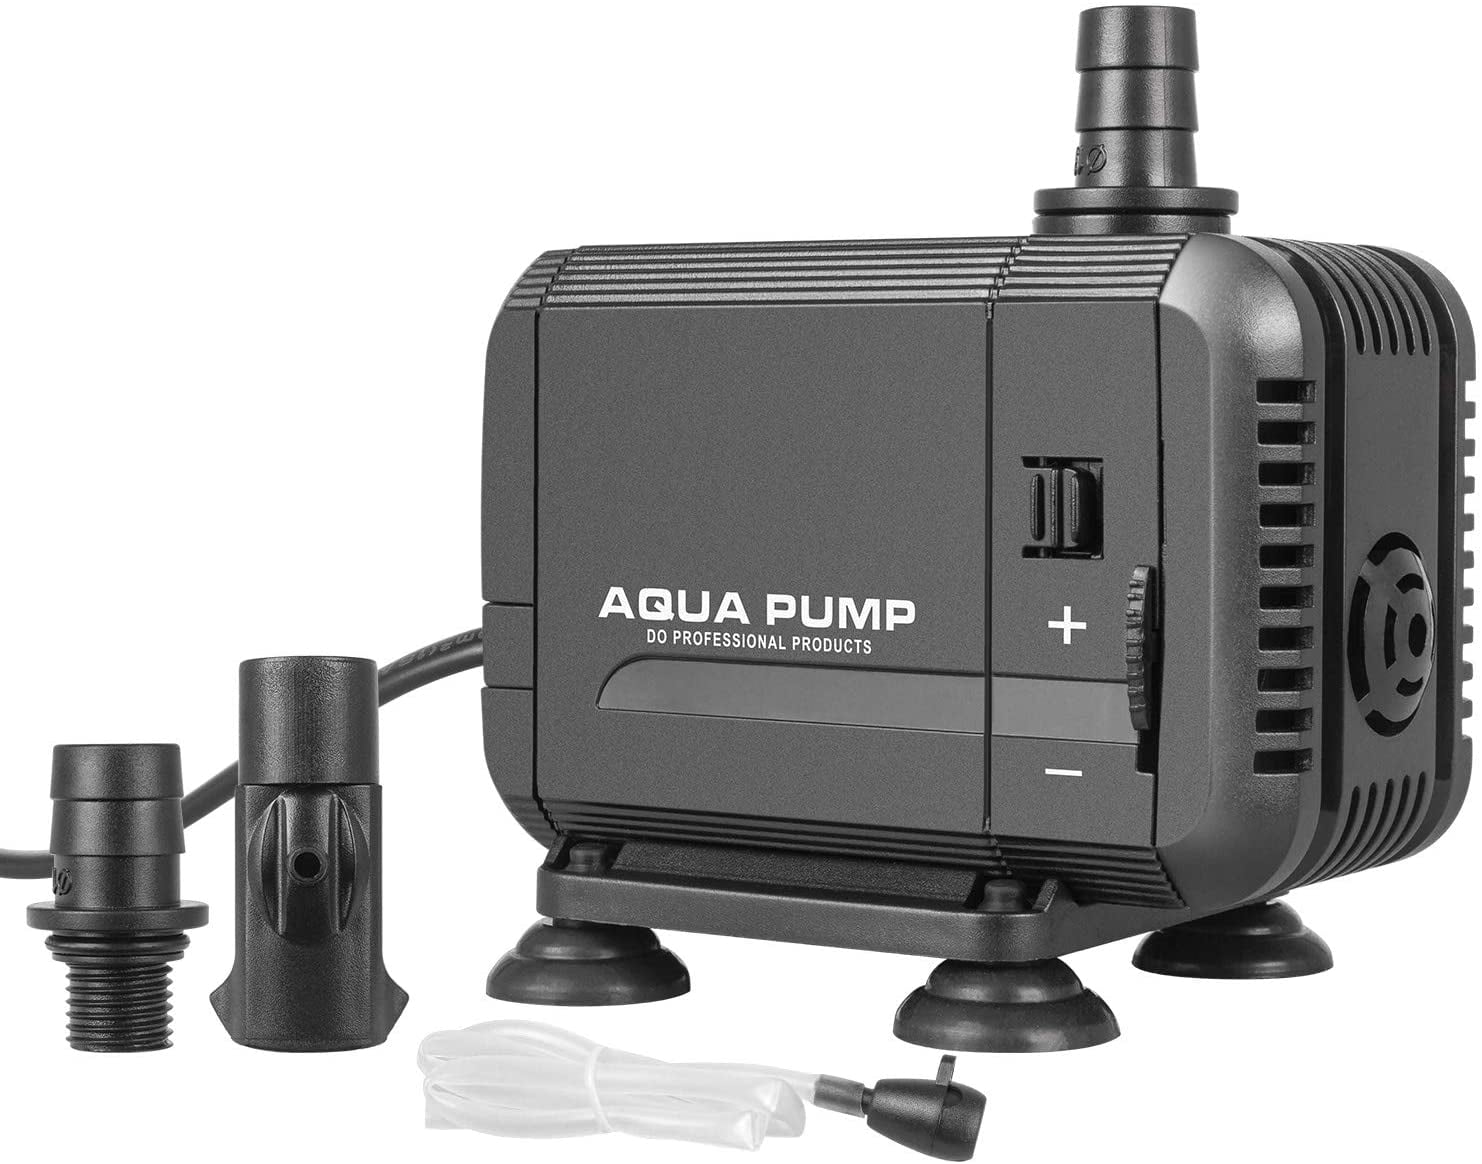 2 Nozzles for Fish Tank 600L/H,10W Hydroponics Number-One Submersible Pump Aquarium Fountain Pump with 3ft High Lift 130GPH 4.9ft Power Cord Statuary Small Quiet Water Pump 